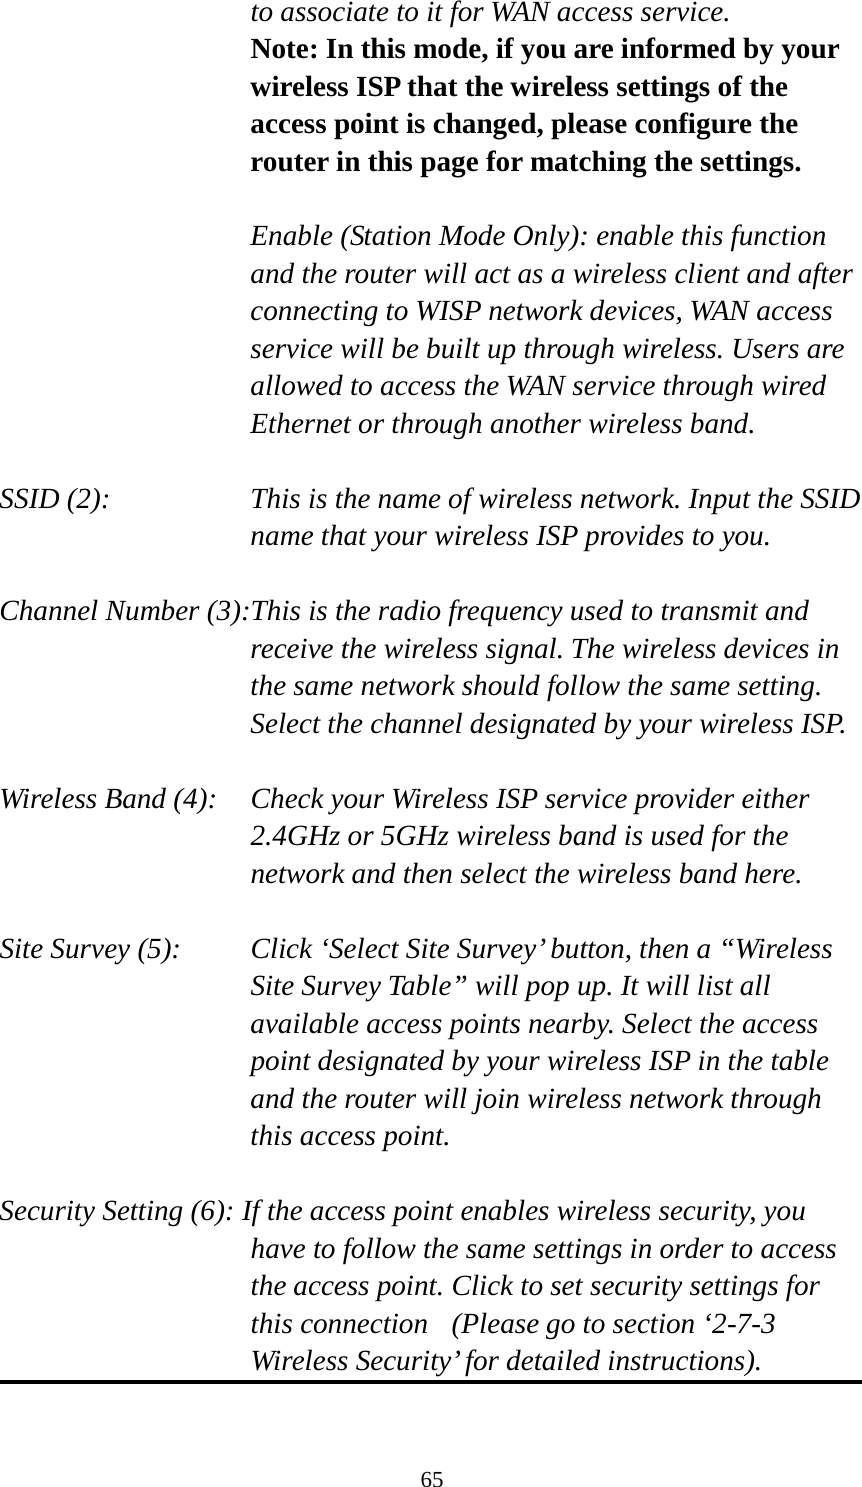 65 to associate to it for WAN access service. Note: In this mode, if you are informed by your wireless ISP that the wireless settings of the access point is changed, please configure the router in this page for matching the settings.  Enable (Station Mode Only): enable this function and the router will act as a wireless client and after connecting to WISP network devices, WAN access service will be built up through wireless. Users are allowed to access the WAN service through wired Ethernet or through another wireless band.  SSID (2):    This is the name of wireless network. Input the SSID name that your wireless ISP provides to you.  Channel Number (3):This is the radio frequency used to transmit and receive the wireless signal. The wireless devices in the same network should follow the same setting. Select the channel designated by your wireless ISP.  Wireless Band (4):    Check your Wireless ISP service provider either 2.4GHz or 5GHz wireless band is used for the network and then select the wireless band here.  Site Survey (5):    Click ‘Select Site Survey’ button, then a “Wireless Site Survey Table” will pop up. It will list all available access points nearby. Select the access point designated by your wireless ISP in the table and the router will join wireless network through this access point.  Security Setting (6): If the access point enables wireless security, you have to follow the same settings in order to access the access point. Click to set security settings for this connection (Please go to section ‘2-7-3 Wireless Security’ for detailed instructions).  